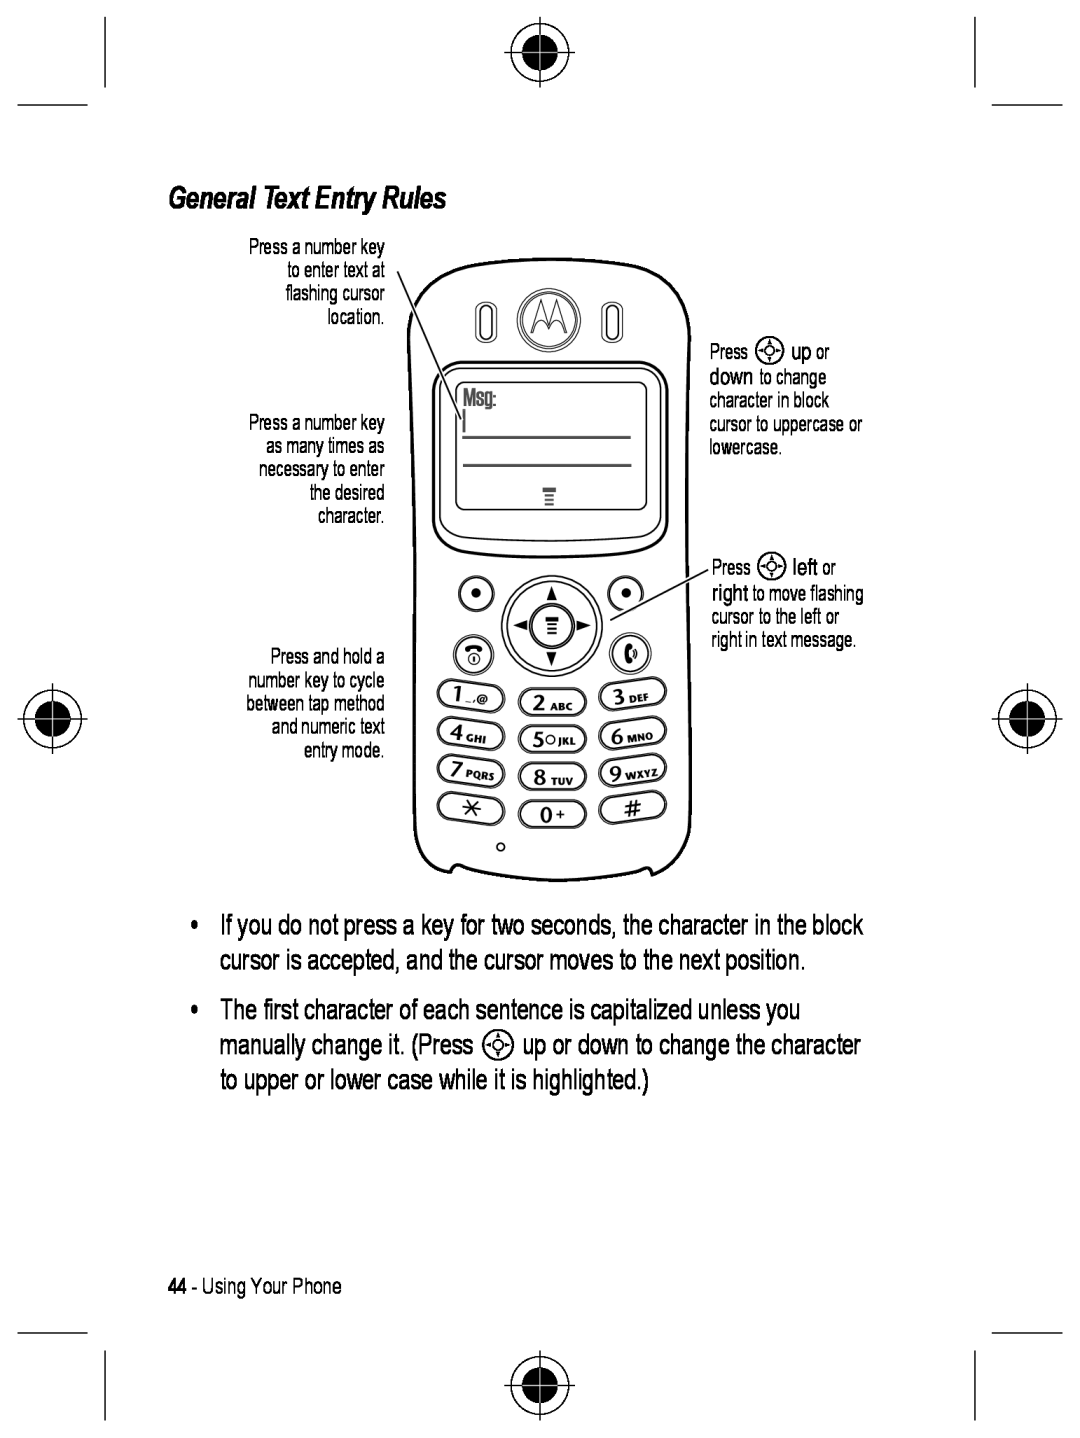 Motorola C330 General Text Entry Rules, Press a number key to enter text at flashing cursor location, Using Your Phone 